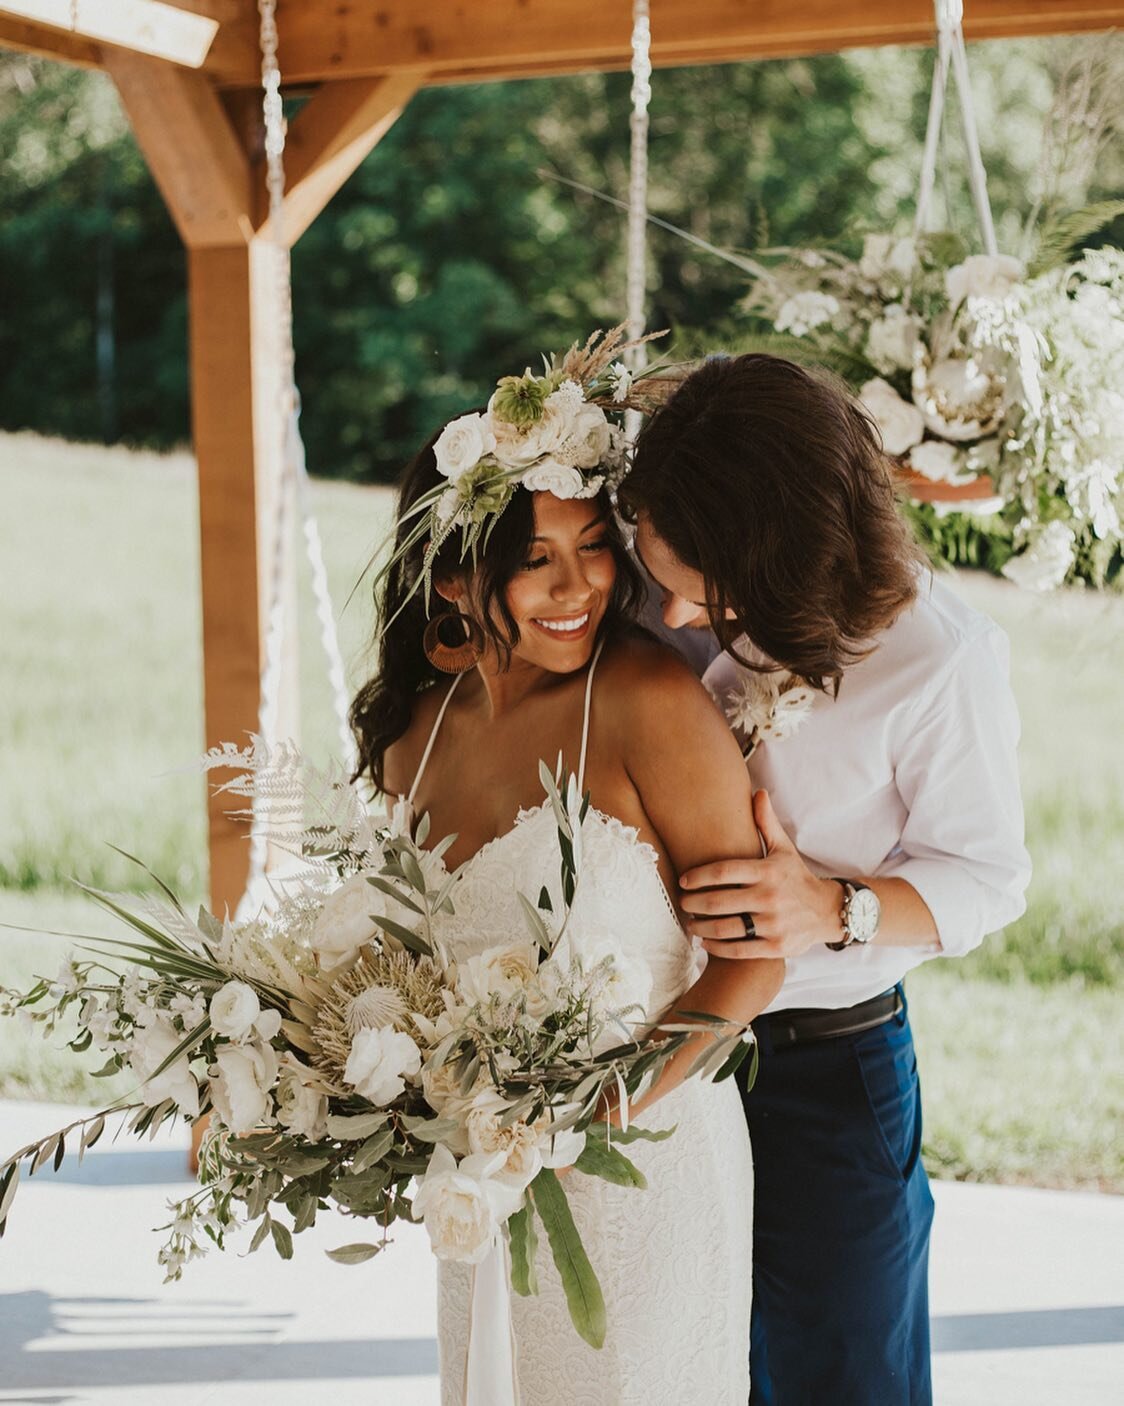 Ugh 😍 these two are just the cutest I swear
-
-
-
-
Host: @shelbyhortonphotography 
Dress: @kphillipsclothier 
Venue: @thewildsvenue 
Florals: @artful_blooms